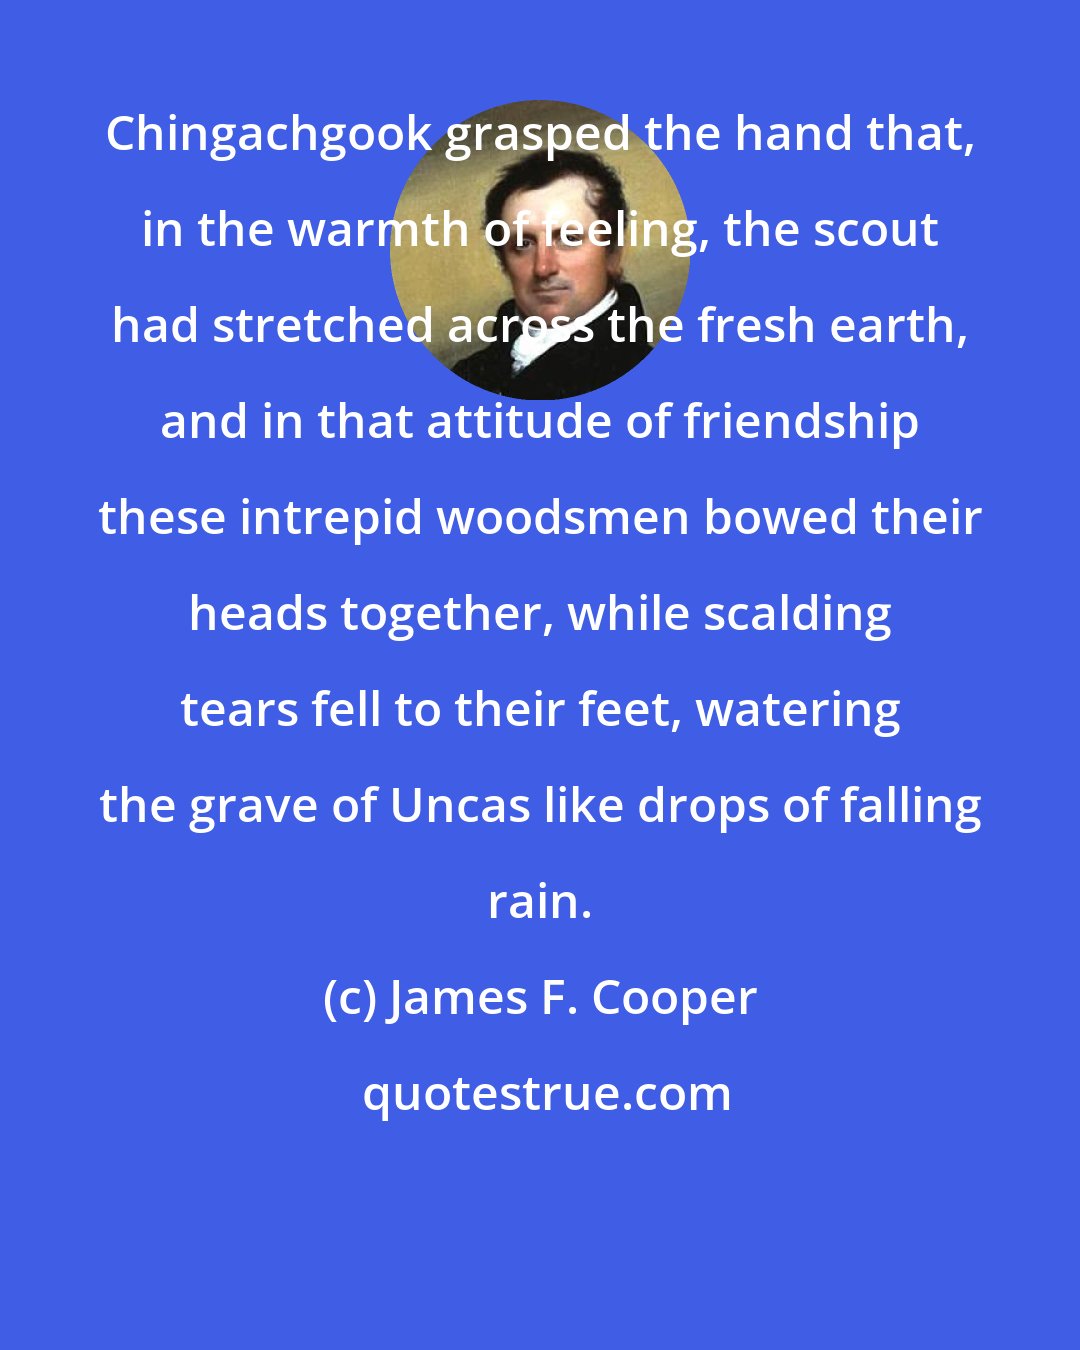 James F. Cooper: Chingachgook grasped the hand that, in the warmth of feeling, the scout had stretched across the fresh earth, and in that attitude of friendship these intrepid woodsmen bowed their heads together, while scalding tears fell to their feet, watering the grave of Uncas like drops of falling rain.